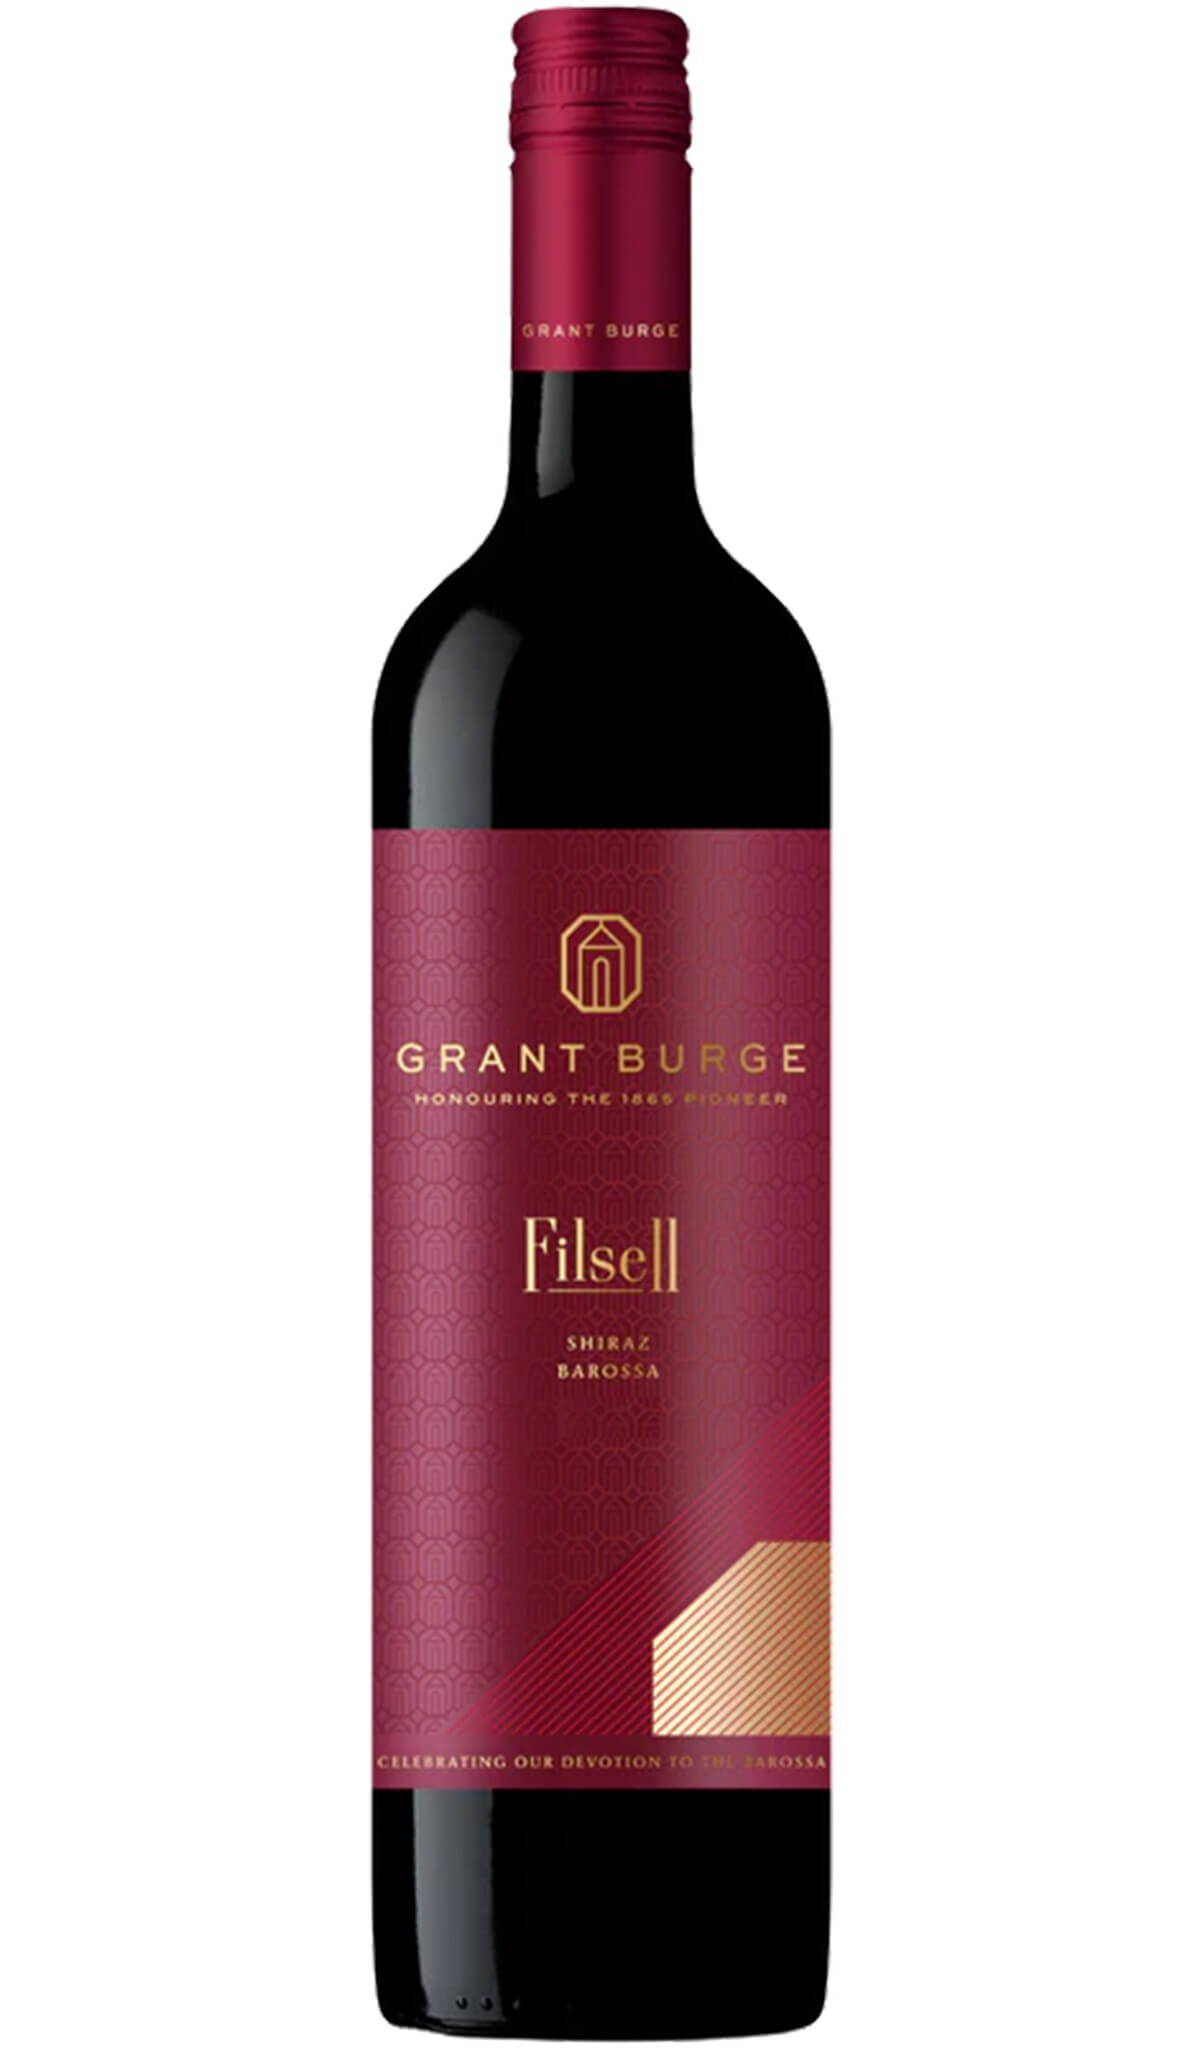 Find out more or buy Grant Burge Filsell Old Vine Shiraz 2020 (Barossa Valley) online at Wine Sellers Direct - Australia’s independent liquor specialists.